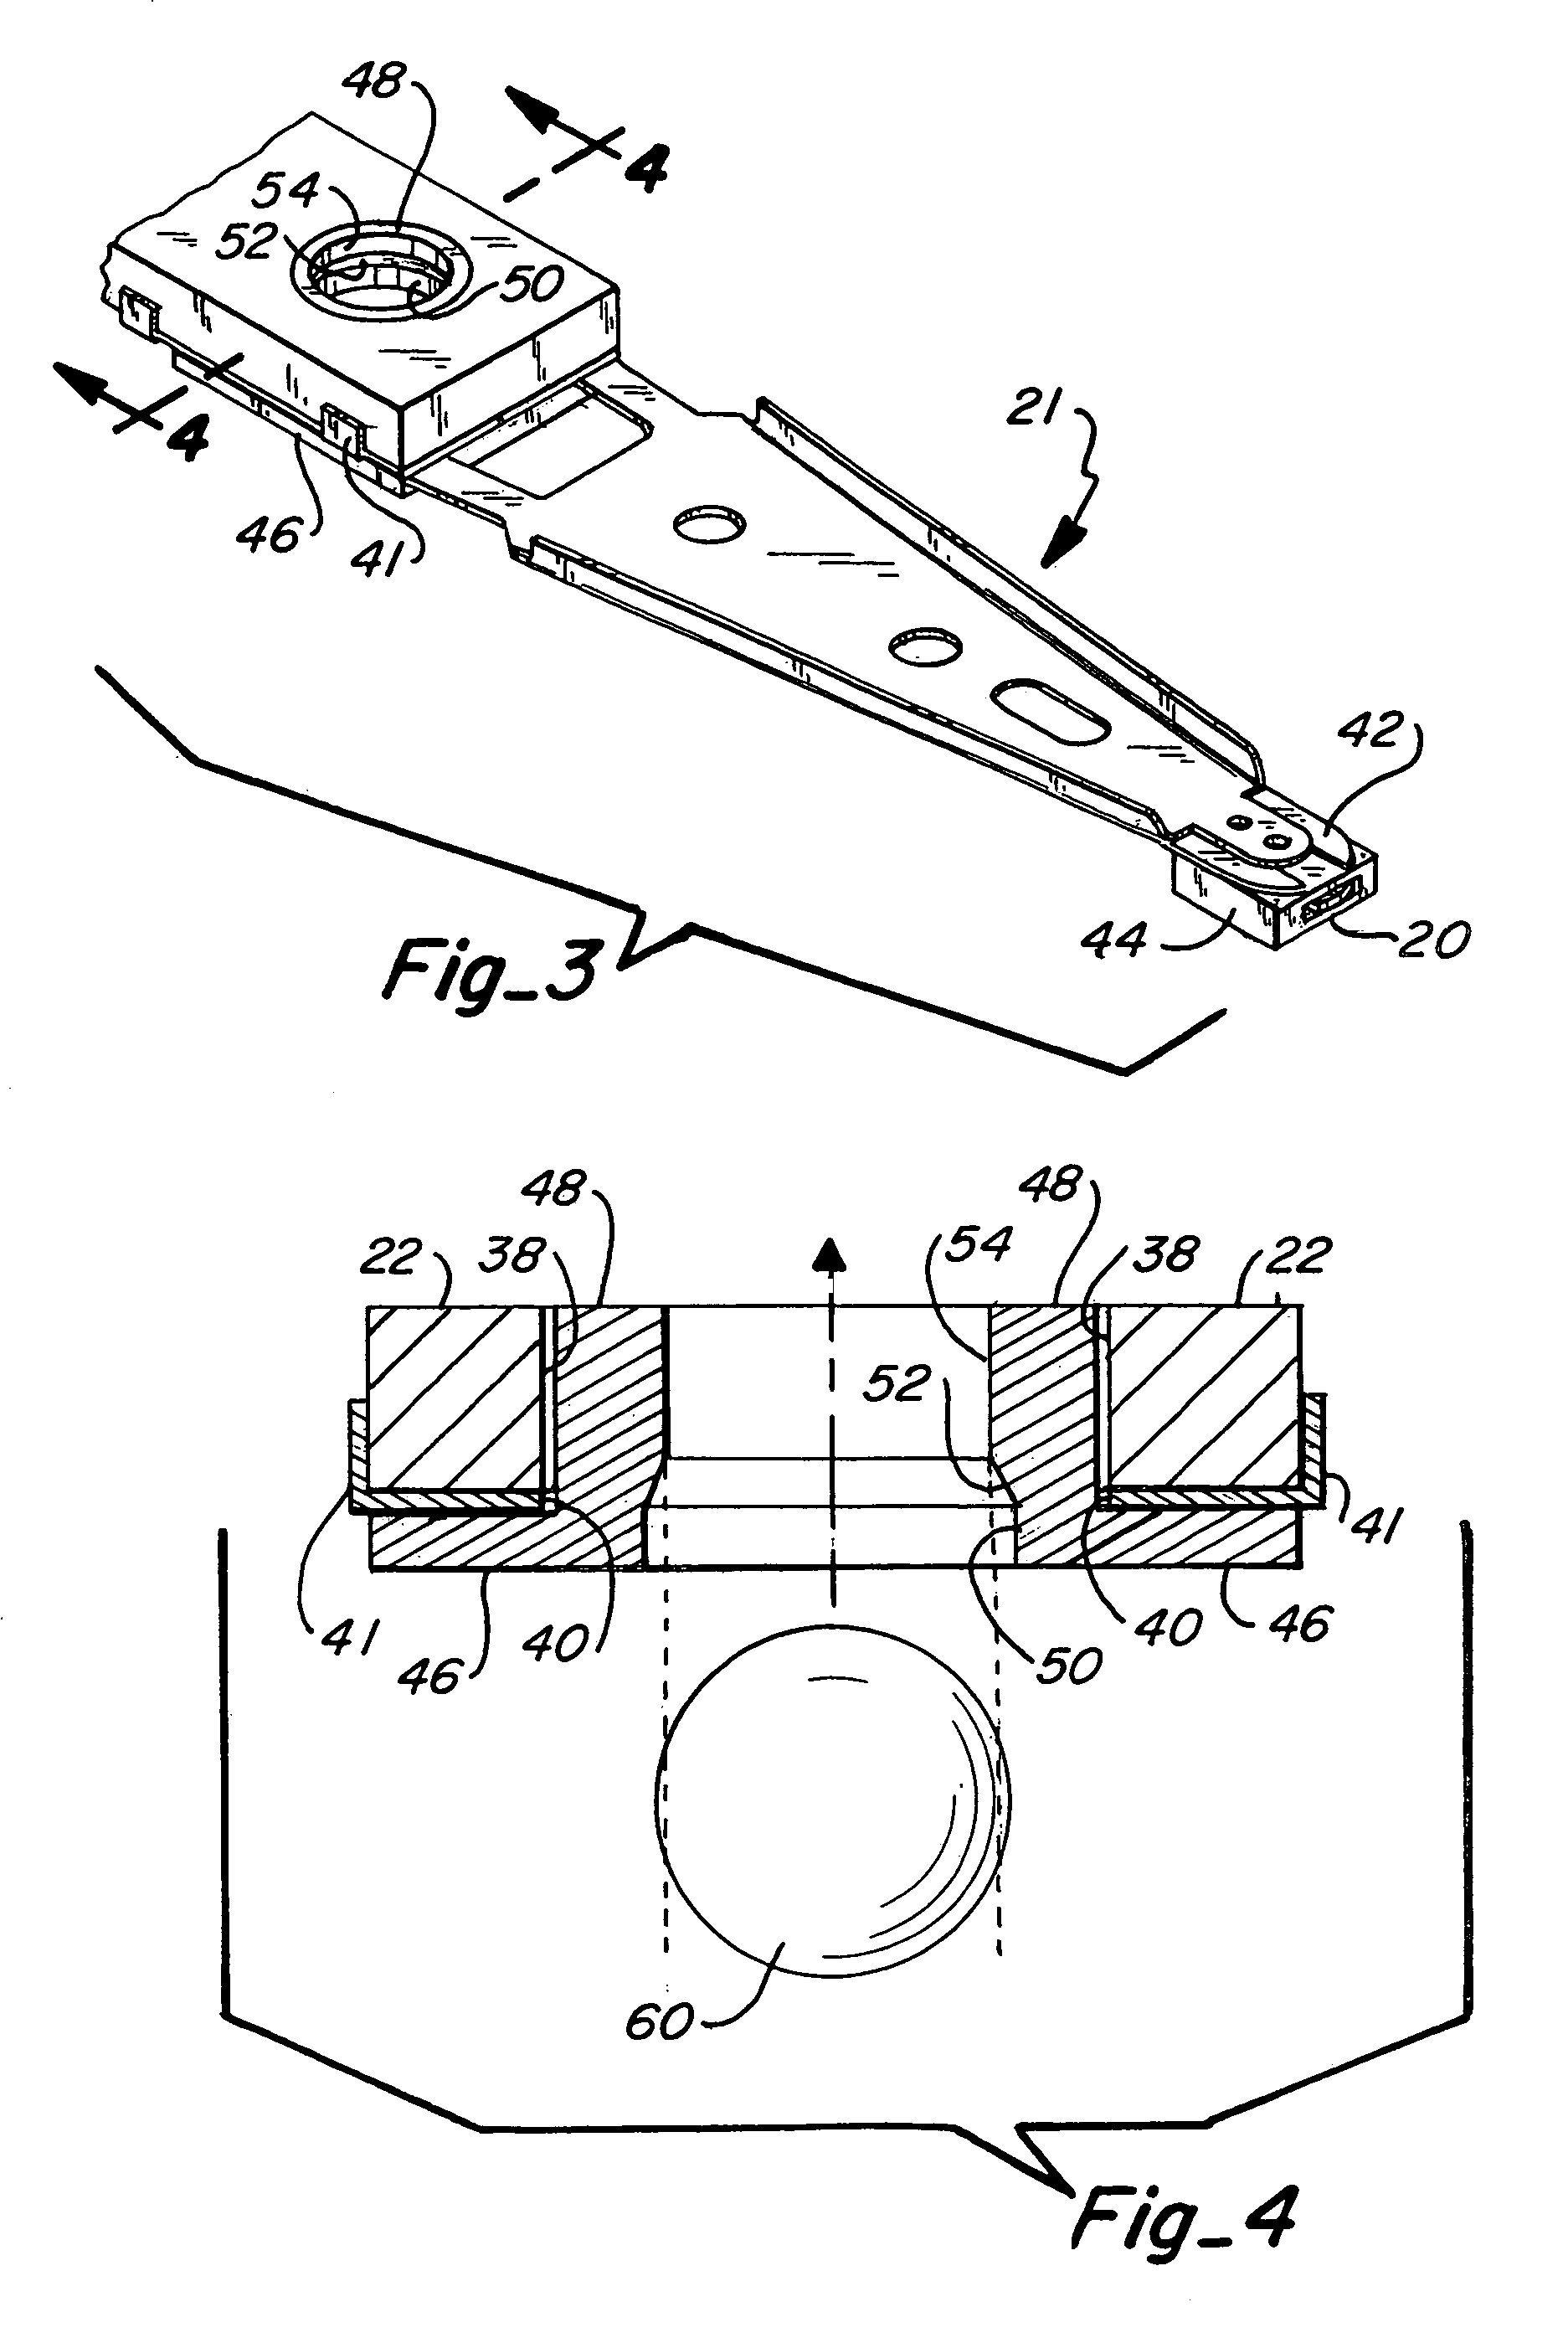 Method of assembling an actuator assembly of a disk drive and of reducing torque out retention values in subsequent de-swaging